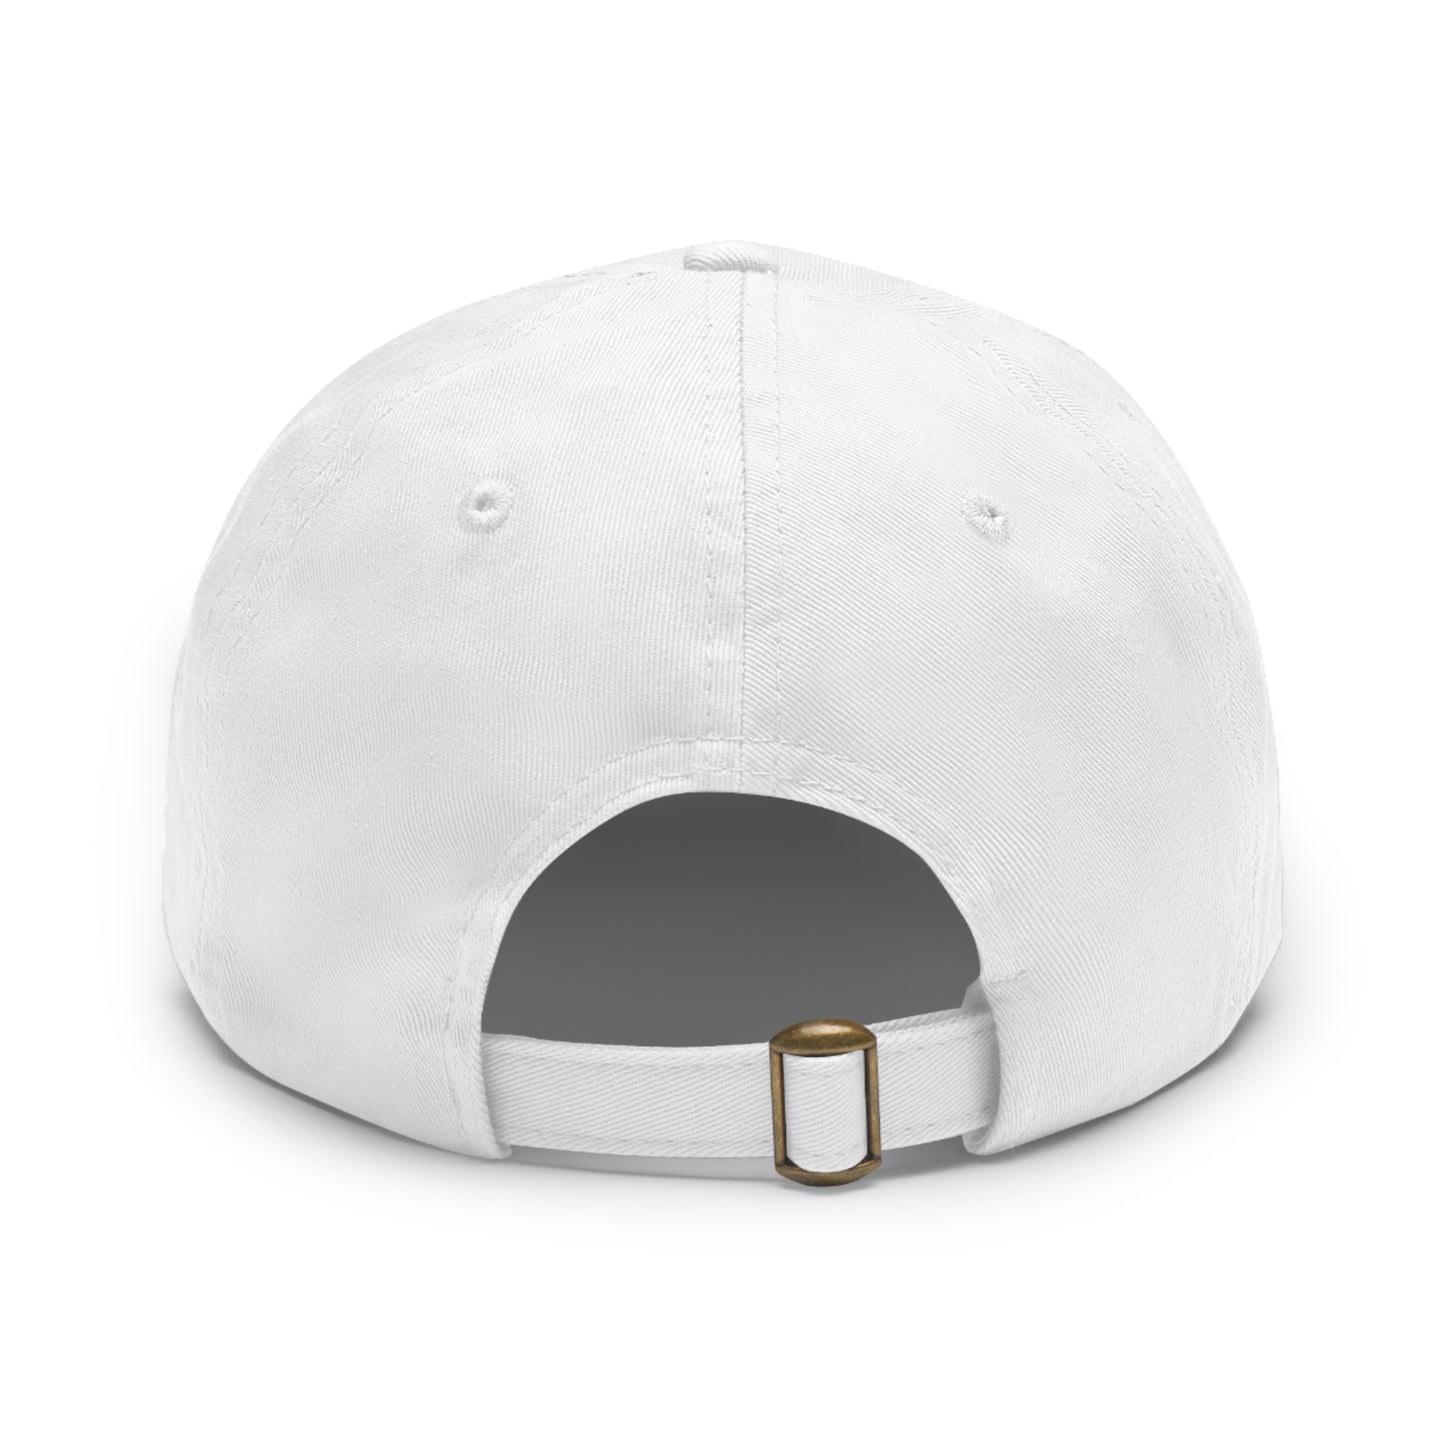 I've Got Purpose Hat with Round Leather Patch